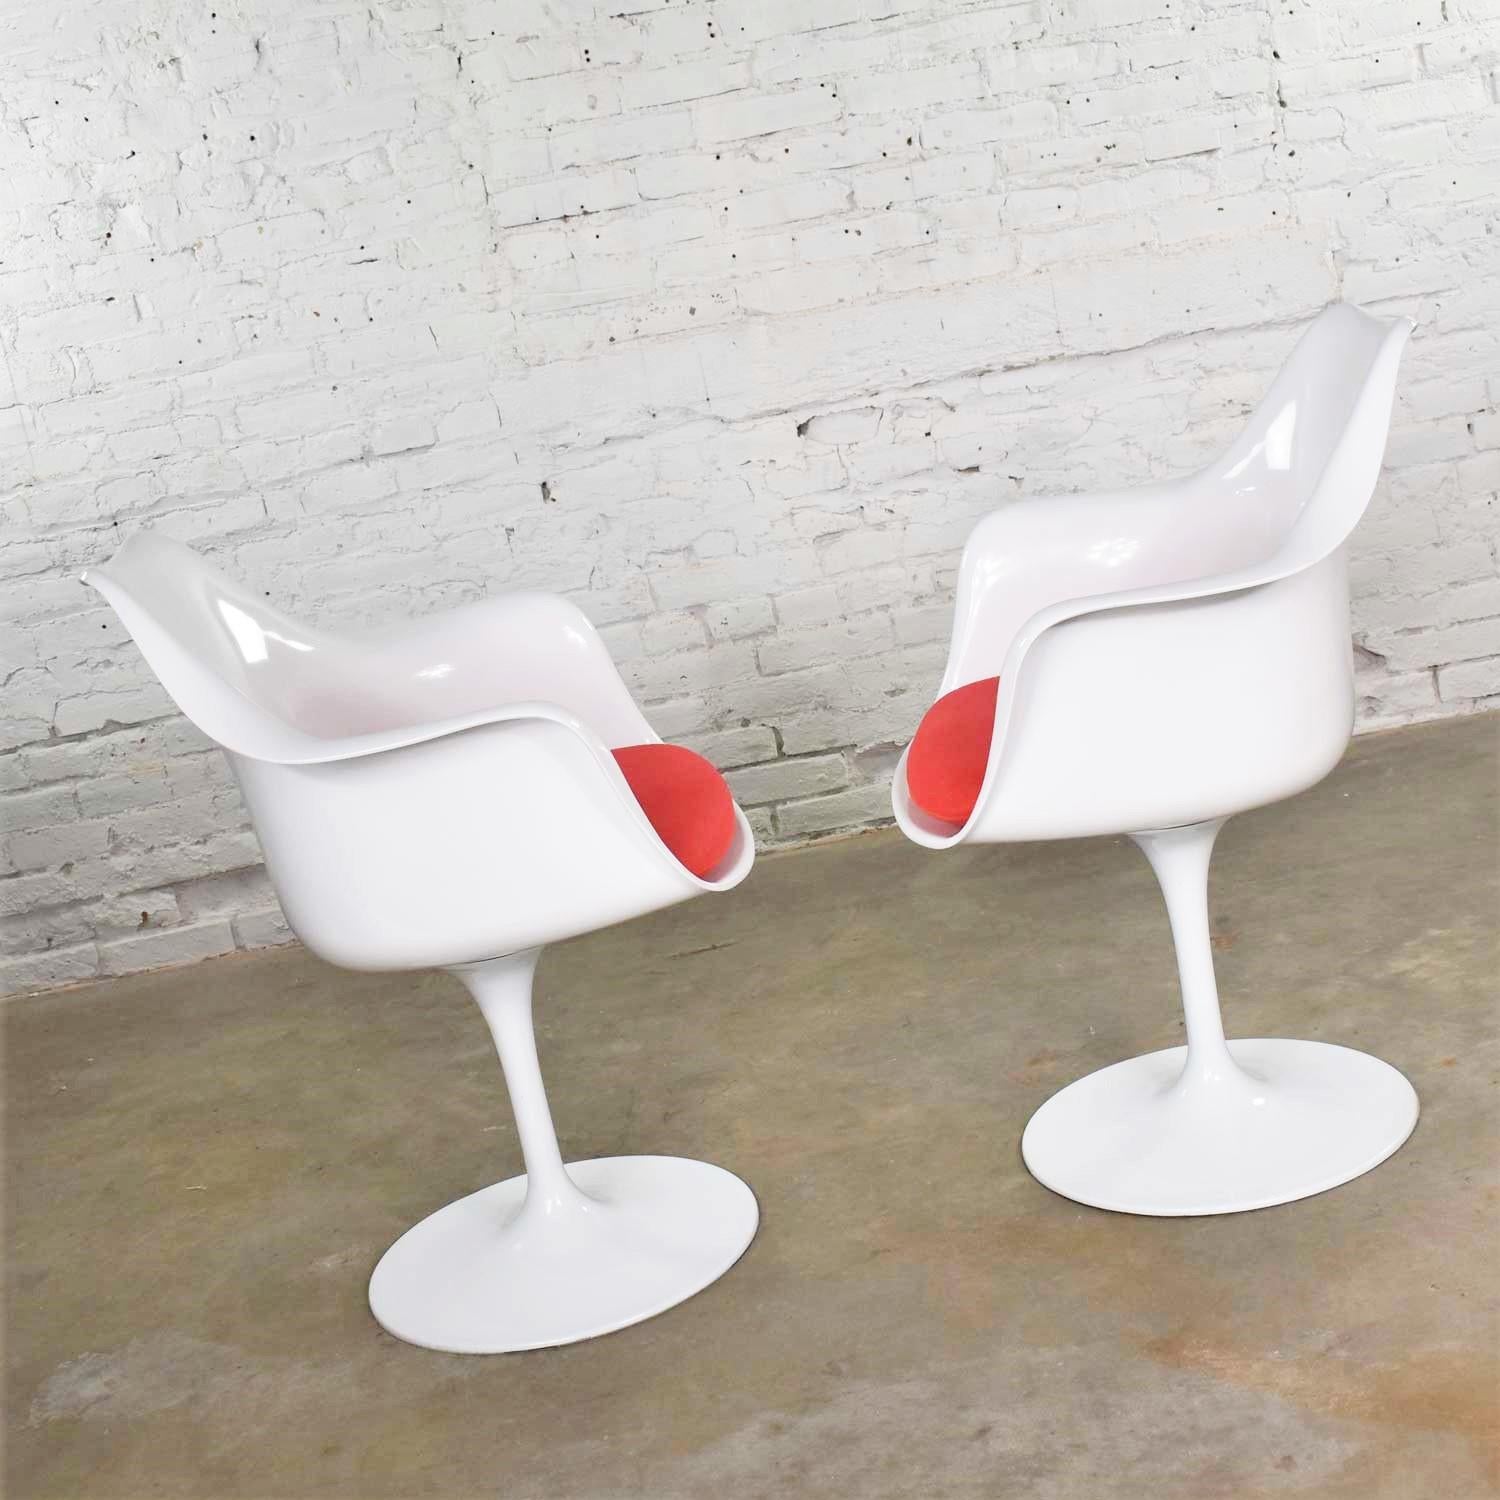 Chinese Pair of White Saarinen Style Tulip Swivel Chairs with Red Cushions